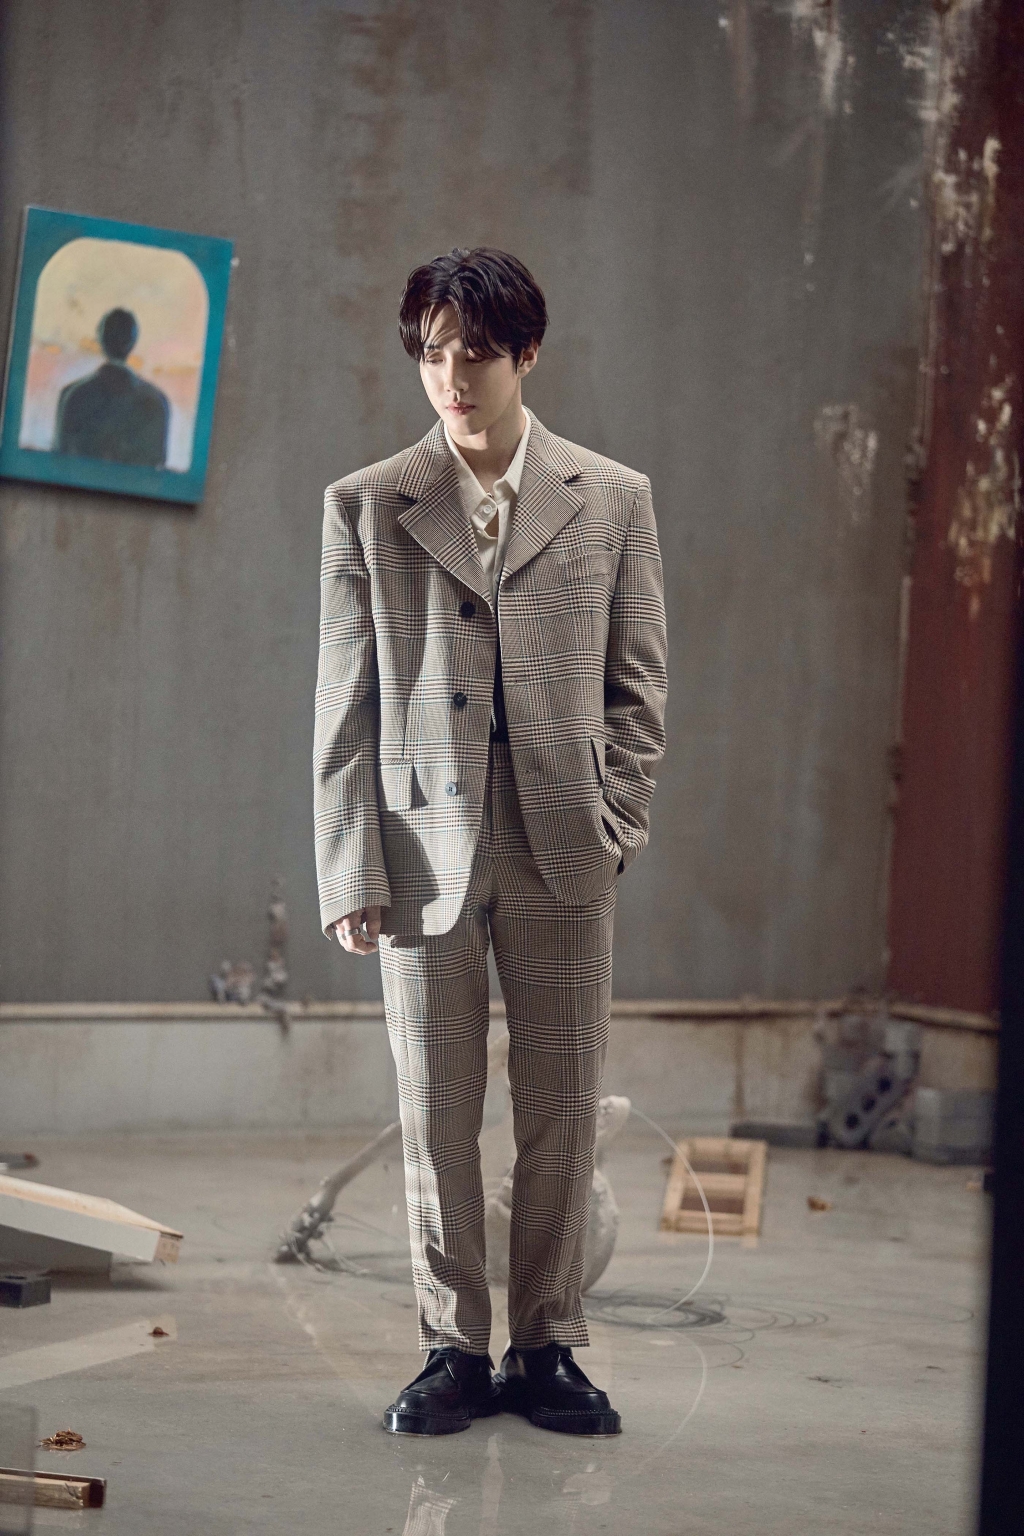 The first solo album title song Love, Lets Love Music Video Teaser video of group EXO member Suho was released.Suhos Love, Lets Do Music Video Teaser video, released on the 28th, has raised expectations for a new song because it can meet the warm and emotional atmosphere of the song and Suhos warm visuals.Also, at 0 am on the 29th, Love, Lets Music Video second teaser video will be released through YouTube and Naver TV SMTOWN channels.It is expected to focus attention on global music fans.In addition, the lyrics of the modern rock genre Love, Haja are poor and insufficient in expressing love, but the lyrics of the lyrics and the soft tone of Suho add to the charm of the song.Suhos first mini-album, Self-Portrait, features a total of six songs based on band sound, in which Suho participated in the songwriting, and will be released on various music sites including Flo, Melon, Genie, iTunes, Apple Music, Sporty Pie, QQ Music, Cougu Music, Cougar Music and Couwar Music at 6 p.m. on the 30th.